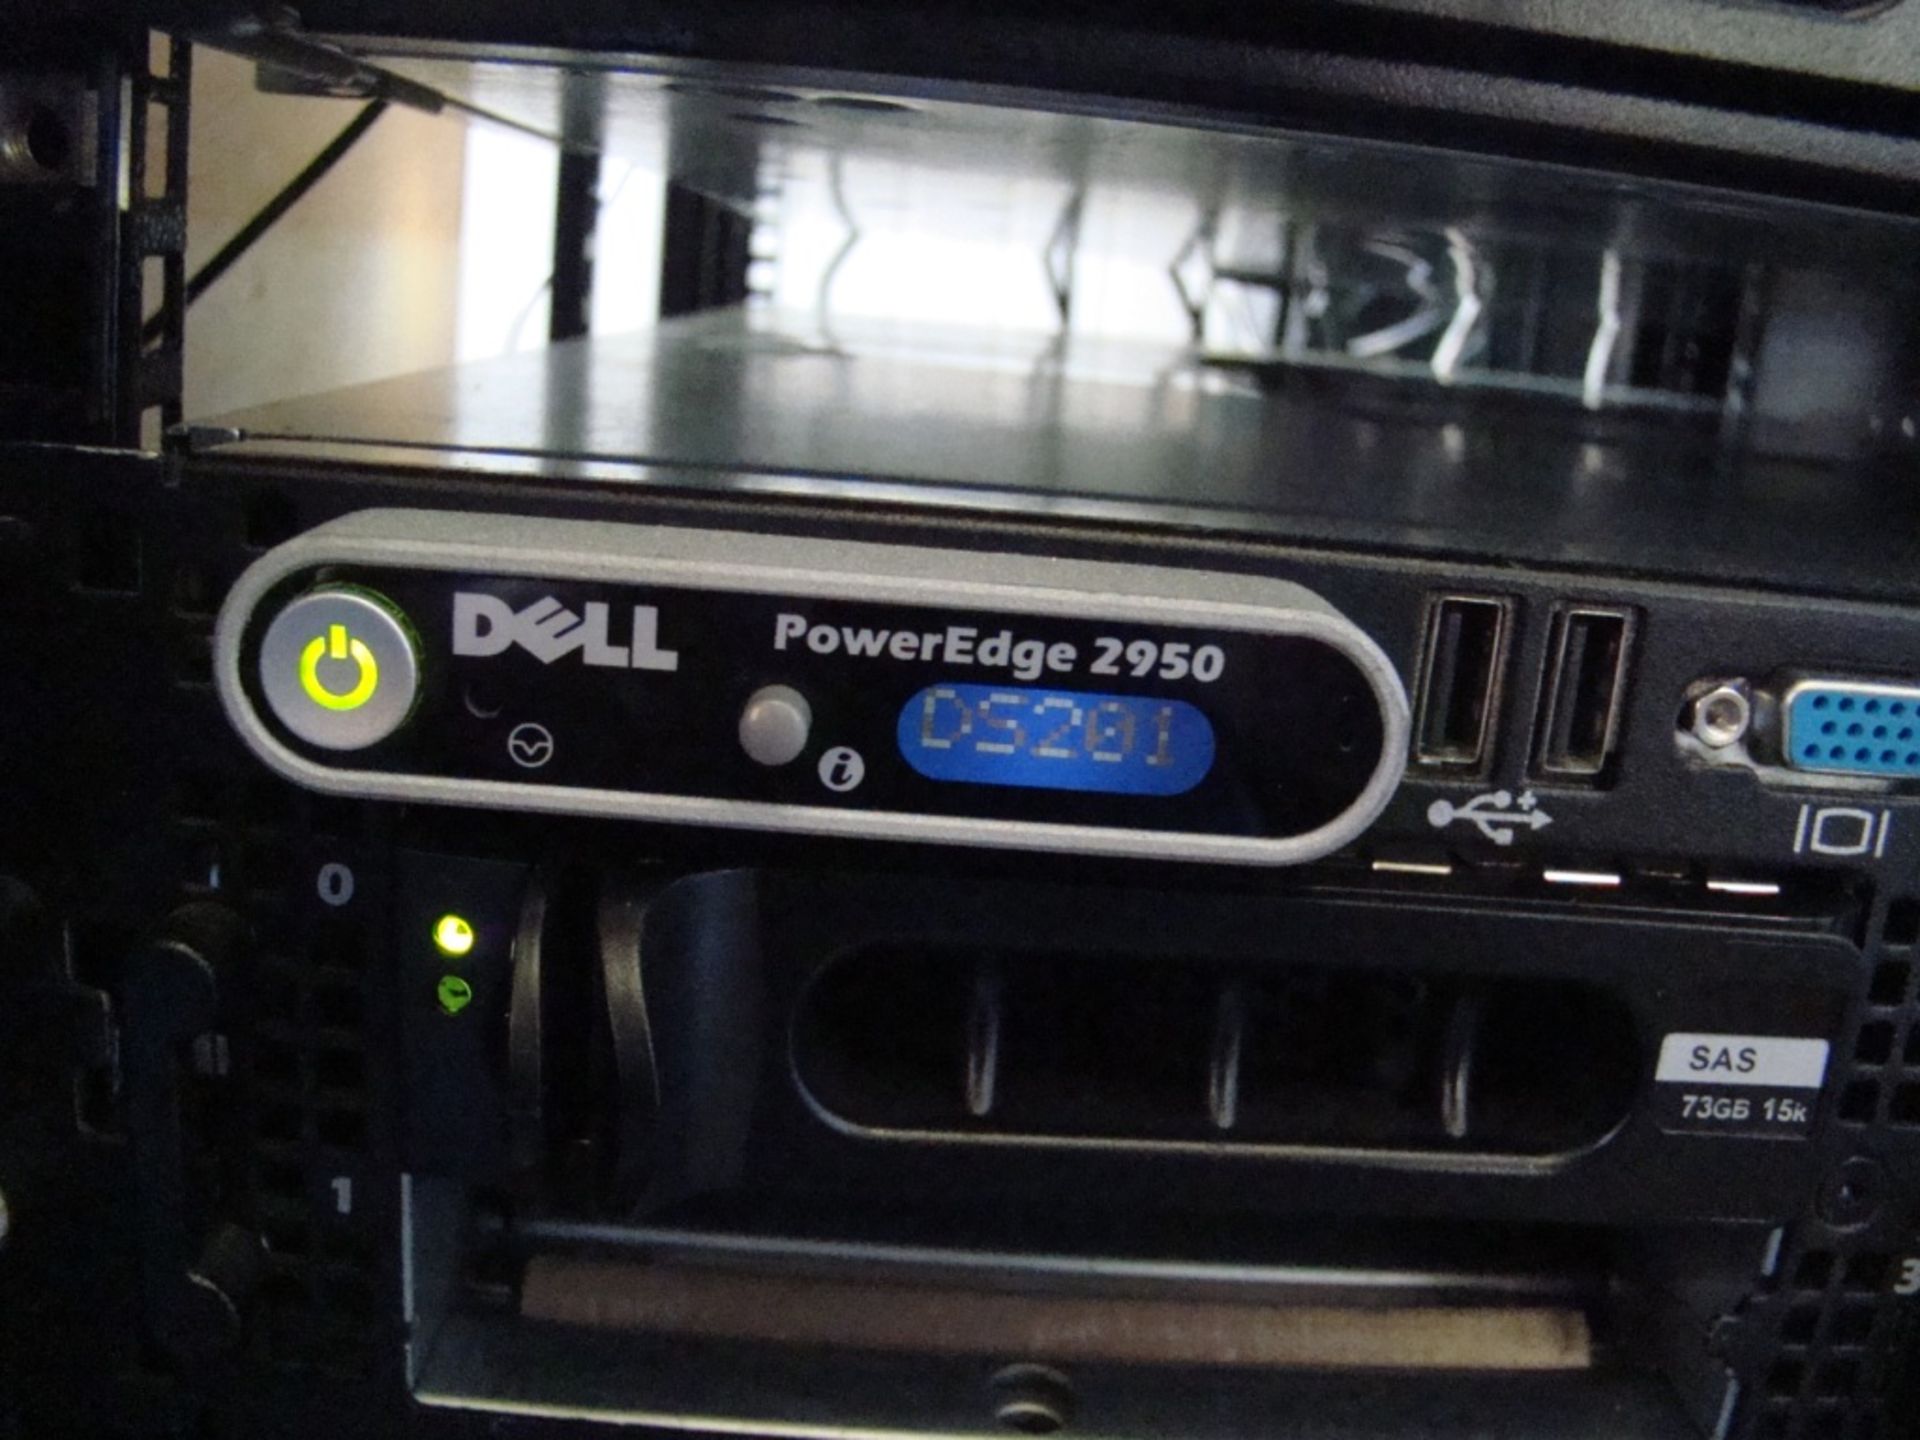 Dell 2950 PowerEdge 2 * 2.66Ghz Quad Core 1333Mhz , 22GB 667 Mhz Memory, 1 * 67Gb HDD, 1 * - Image 3 of 9